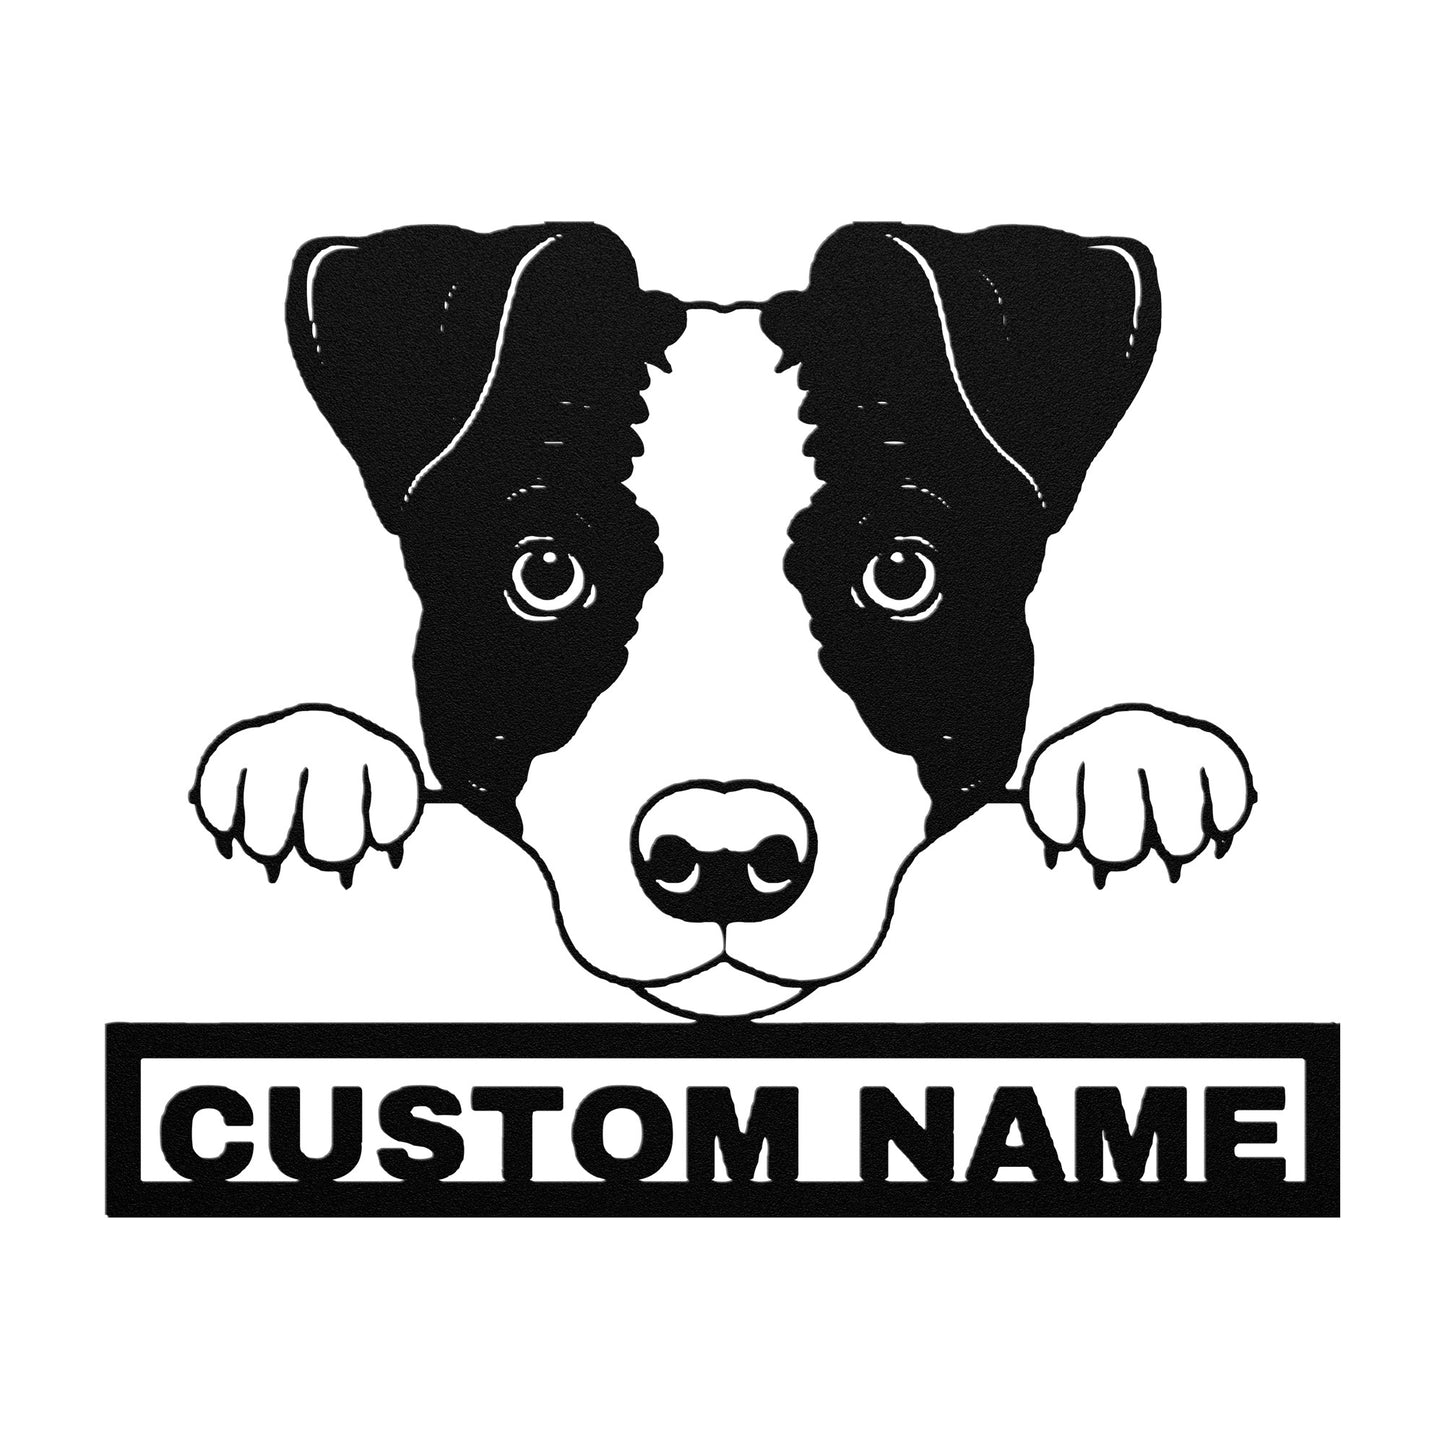 Personalized Jack Russell Dog Metal Sign - Jack Russell Custom Name Wall Decor, Metal Signs Customized Outdoor Indoor, Wall Art Gift For Jack Russell Dog Lover